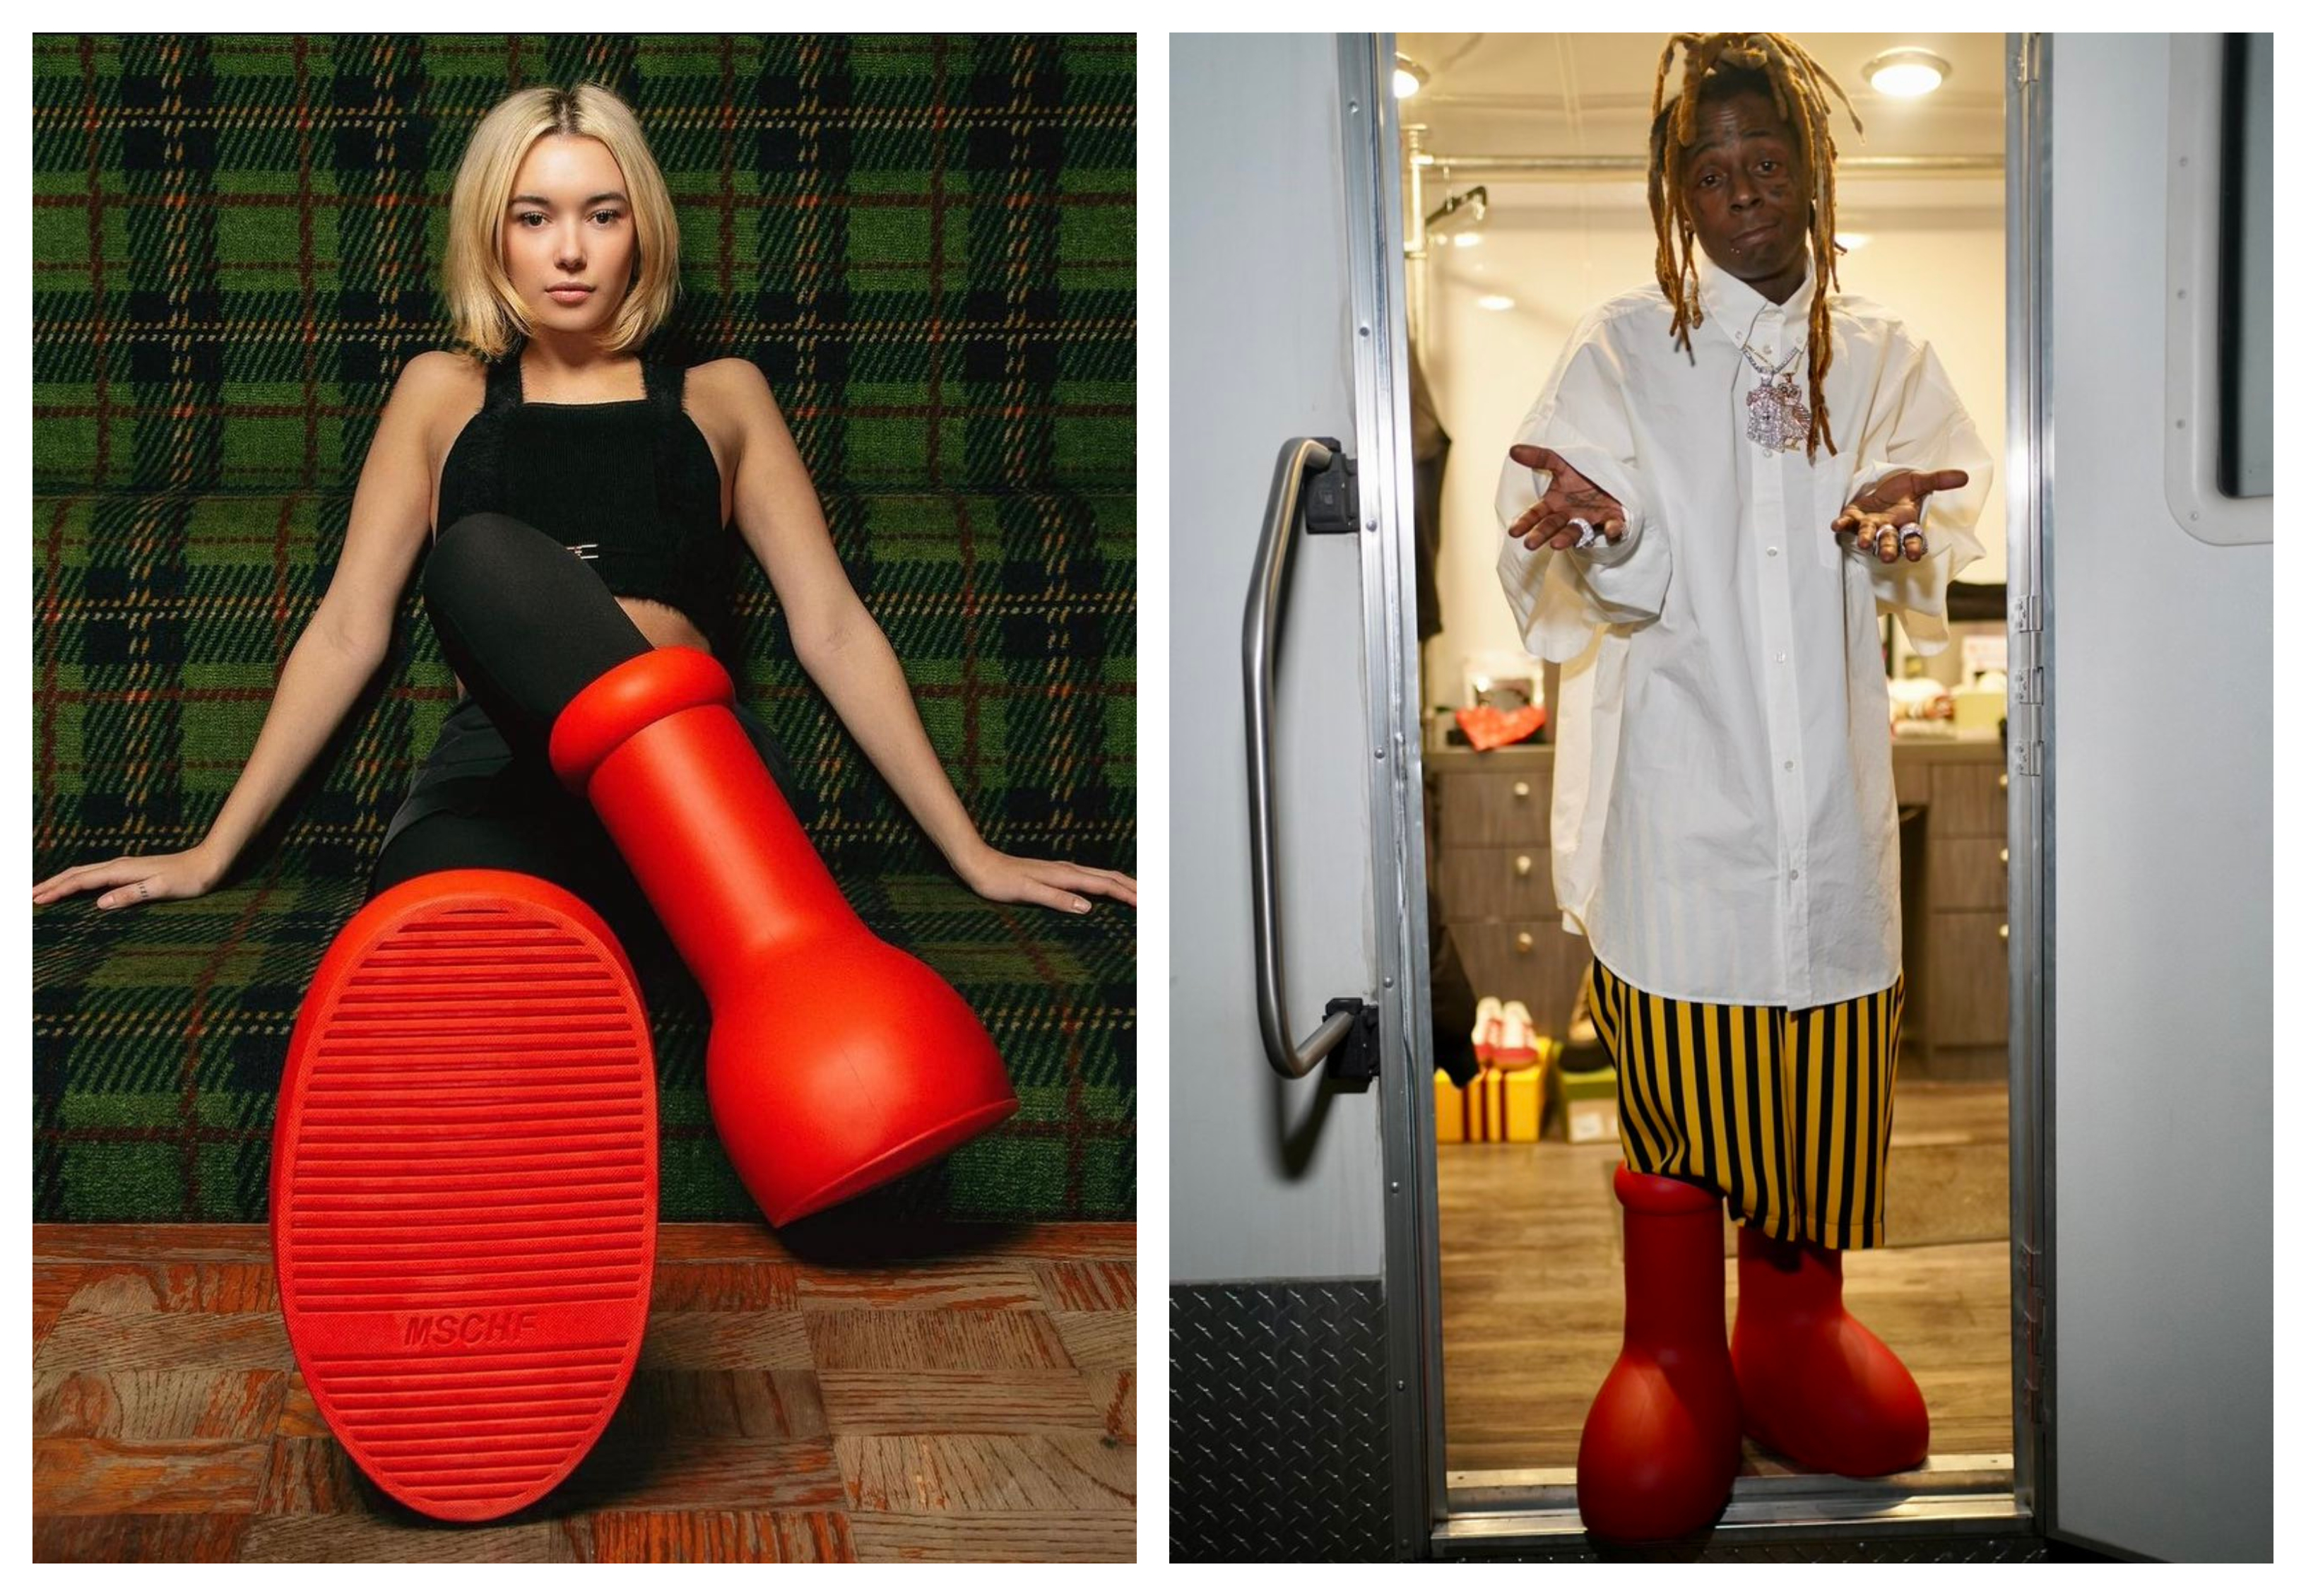 Big red boots: What to know about the new celeb fashion trend